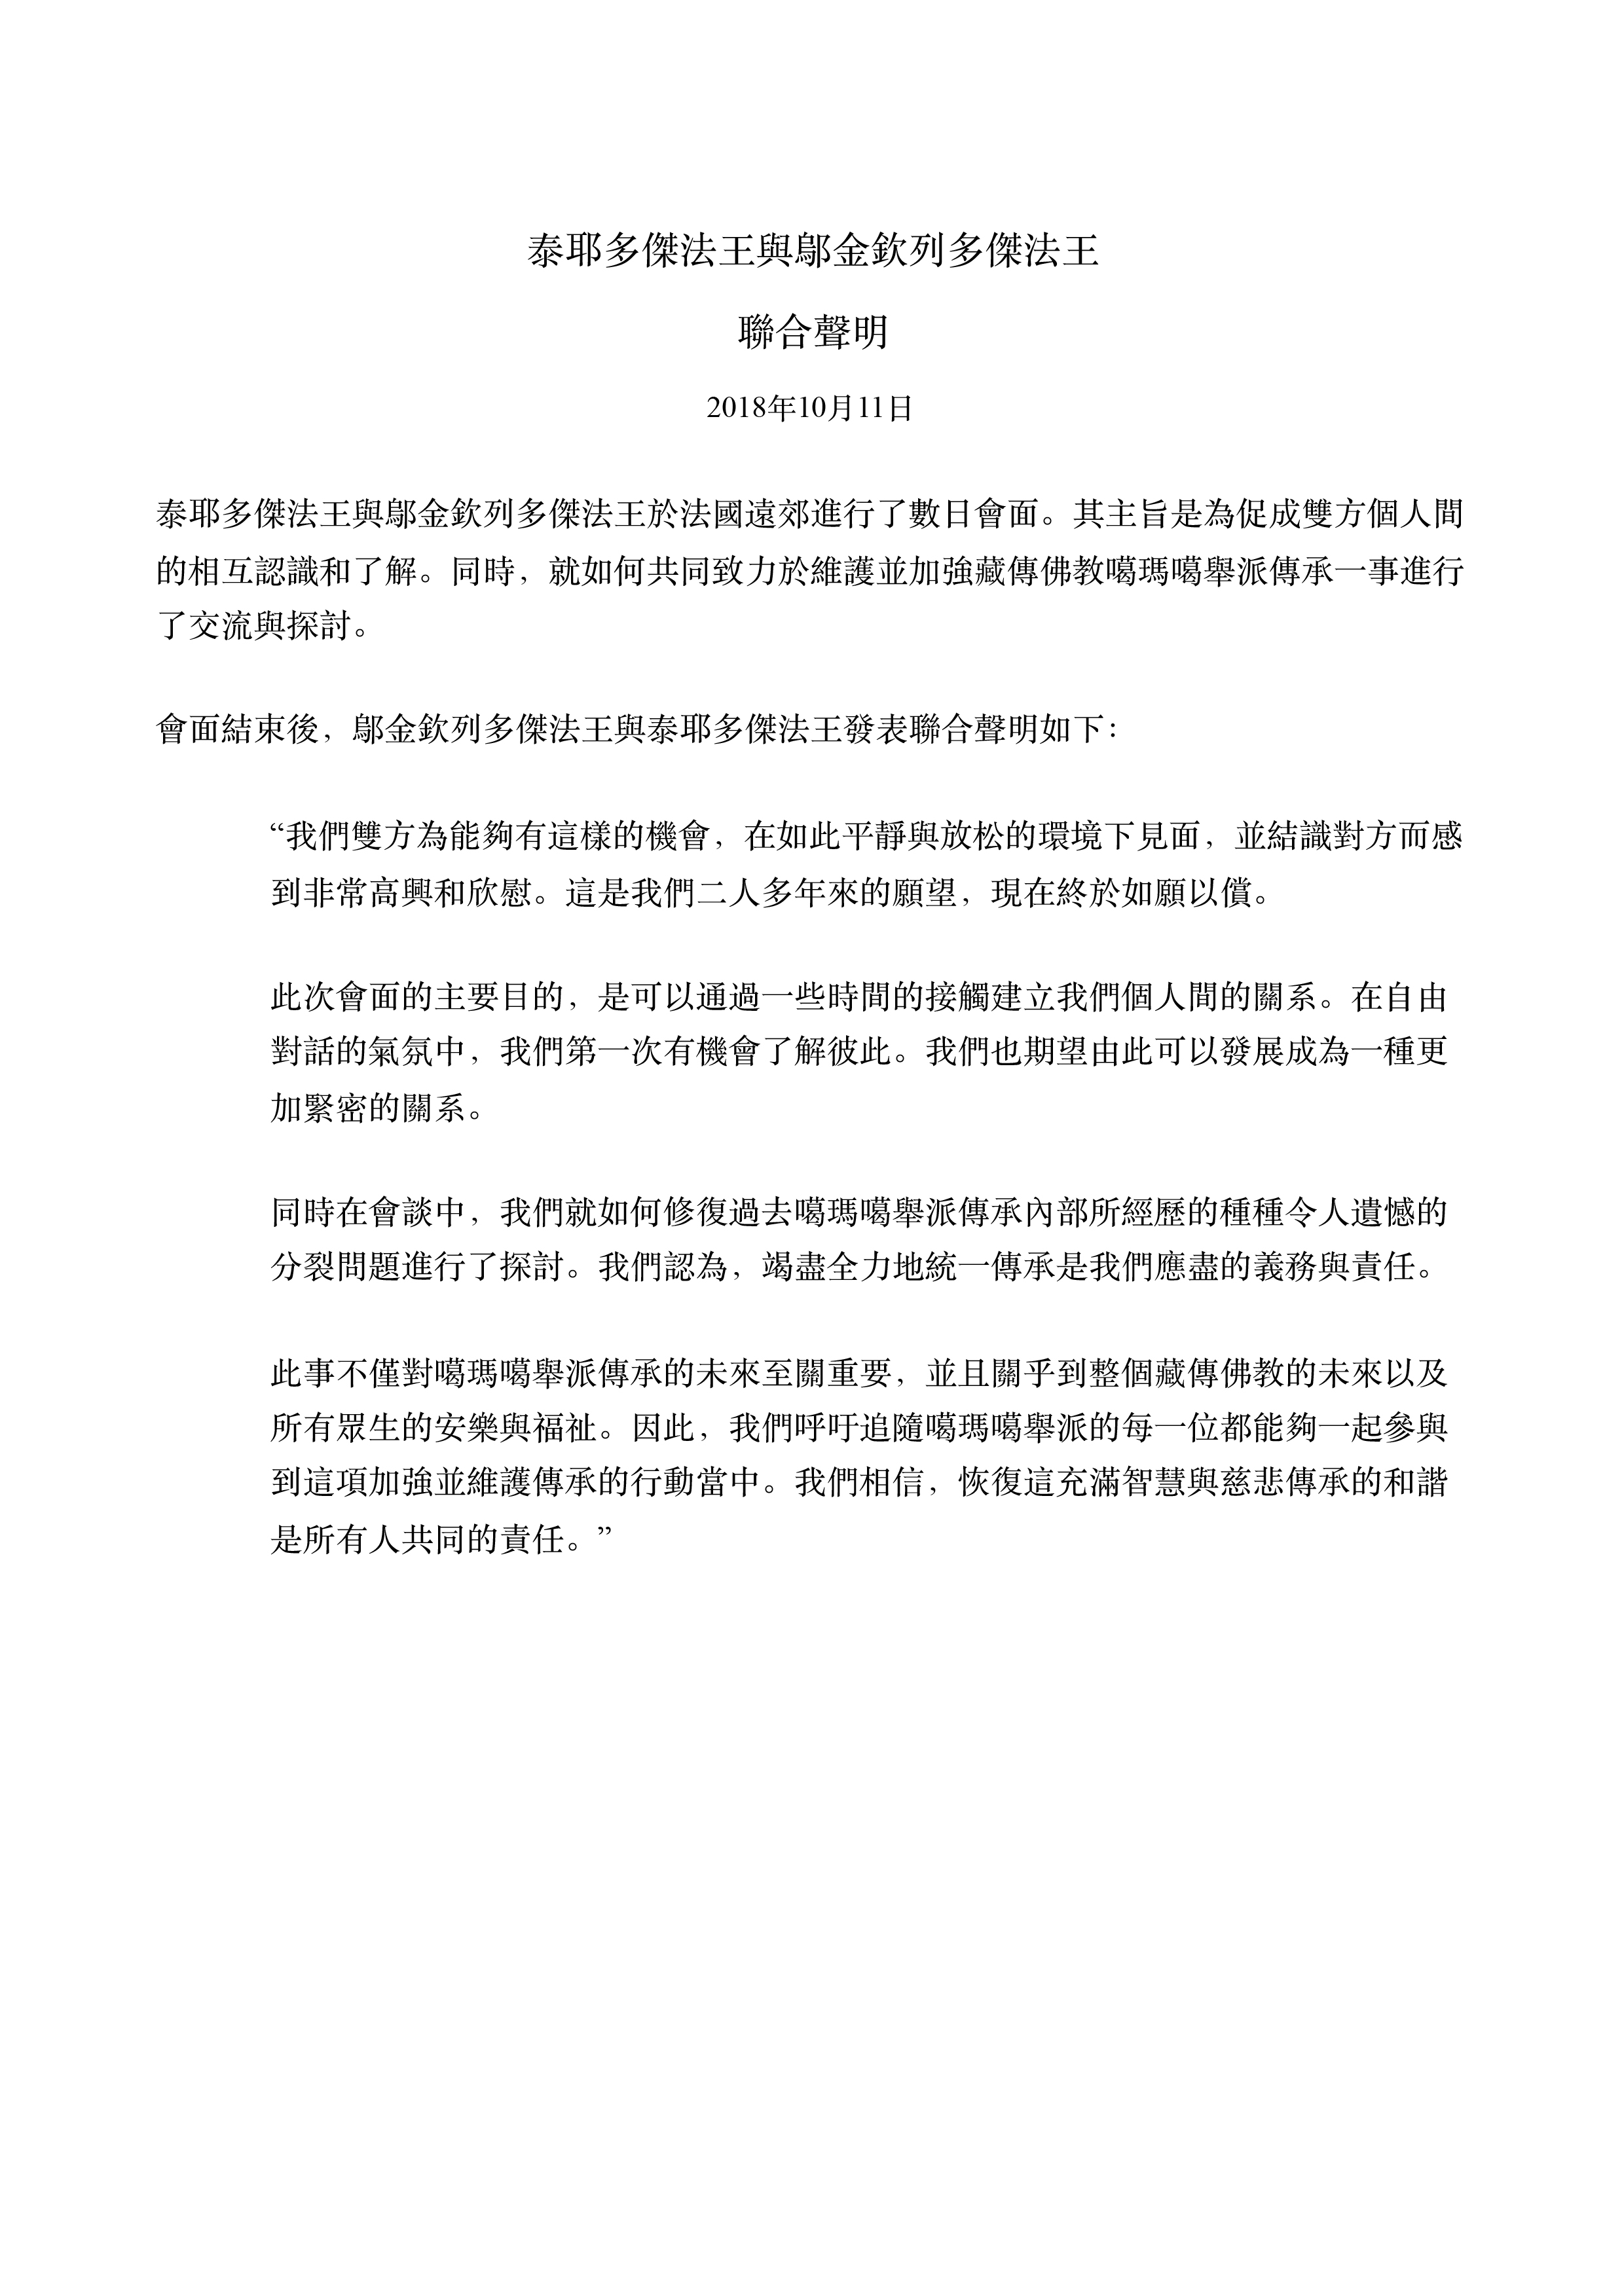 thesis statement in chinese